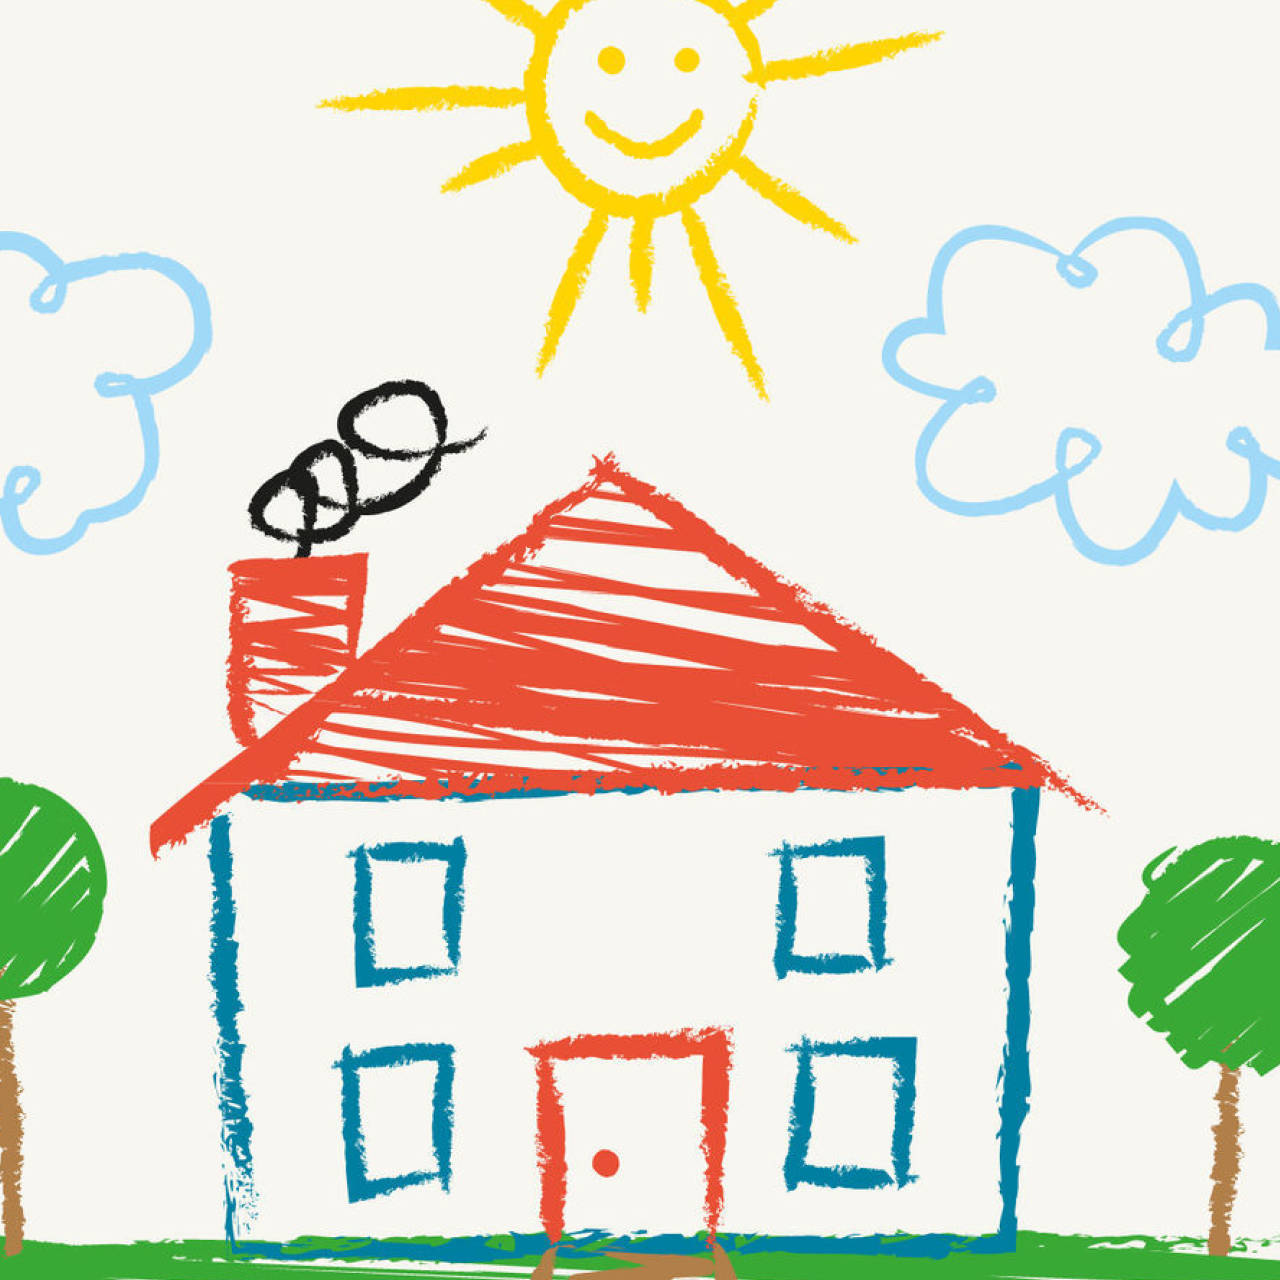 Picture of a house draw by a child